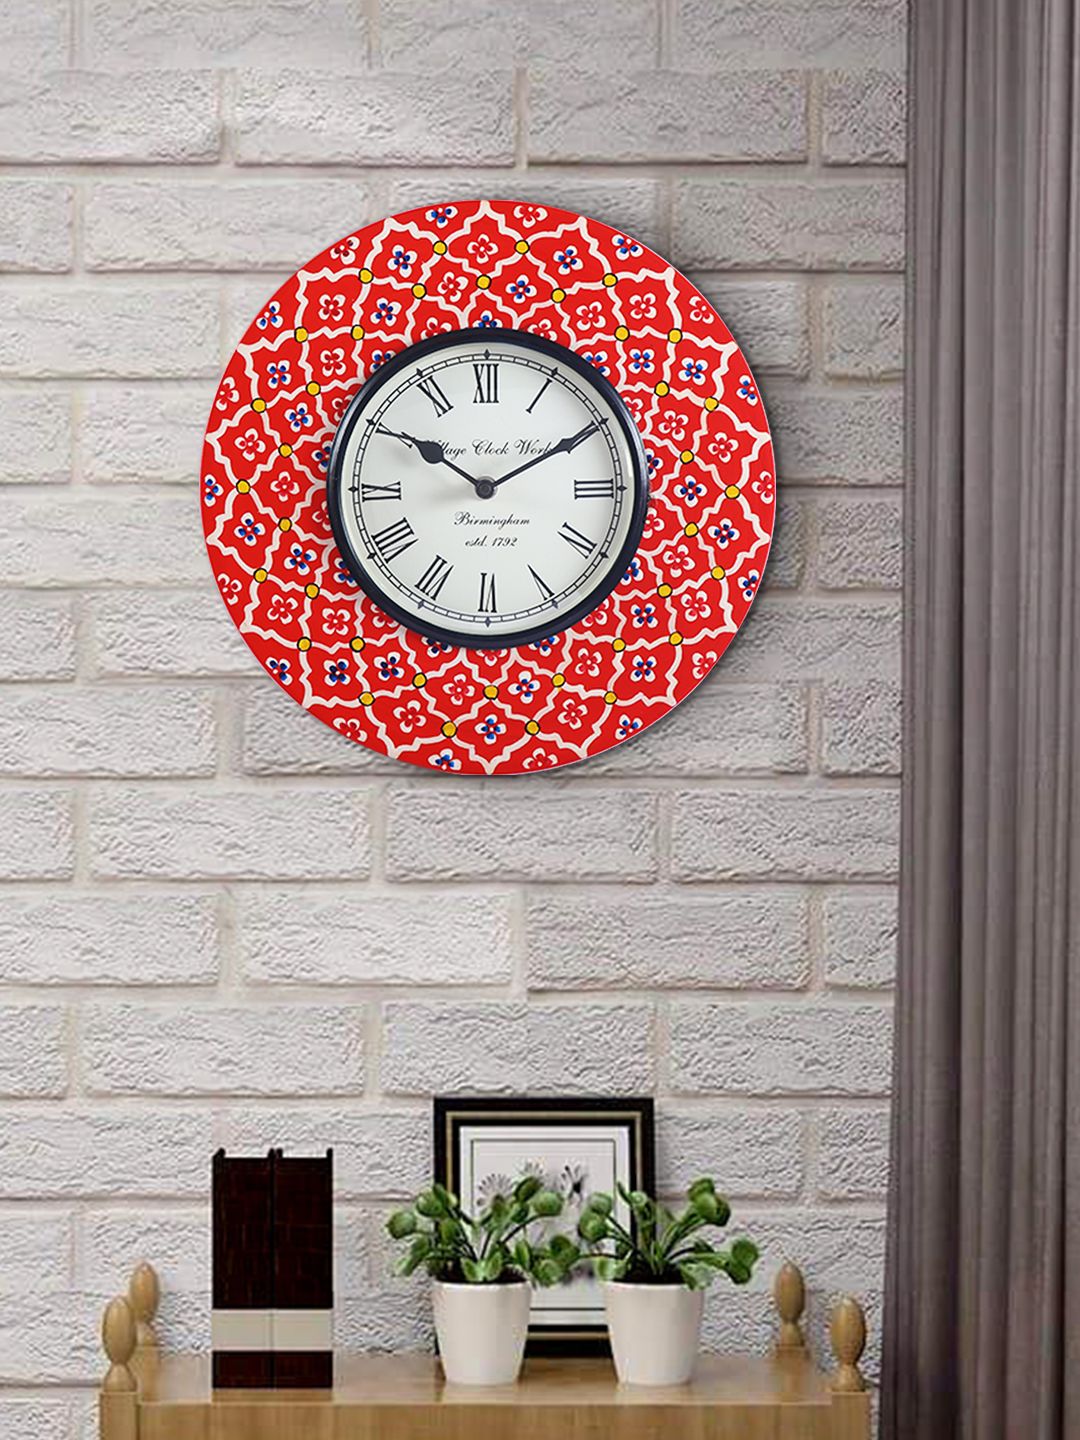 Aapno Rajasthan Red & Blue Printed Round Traditional Wall Clock Price in India